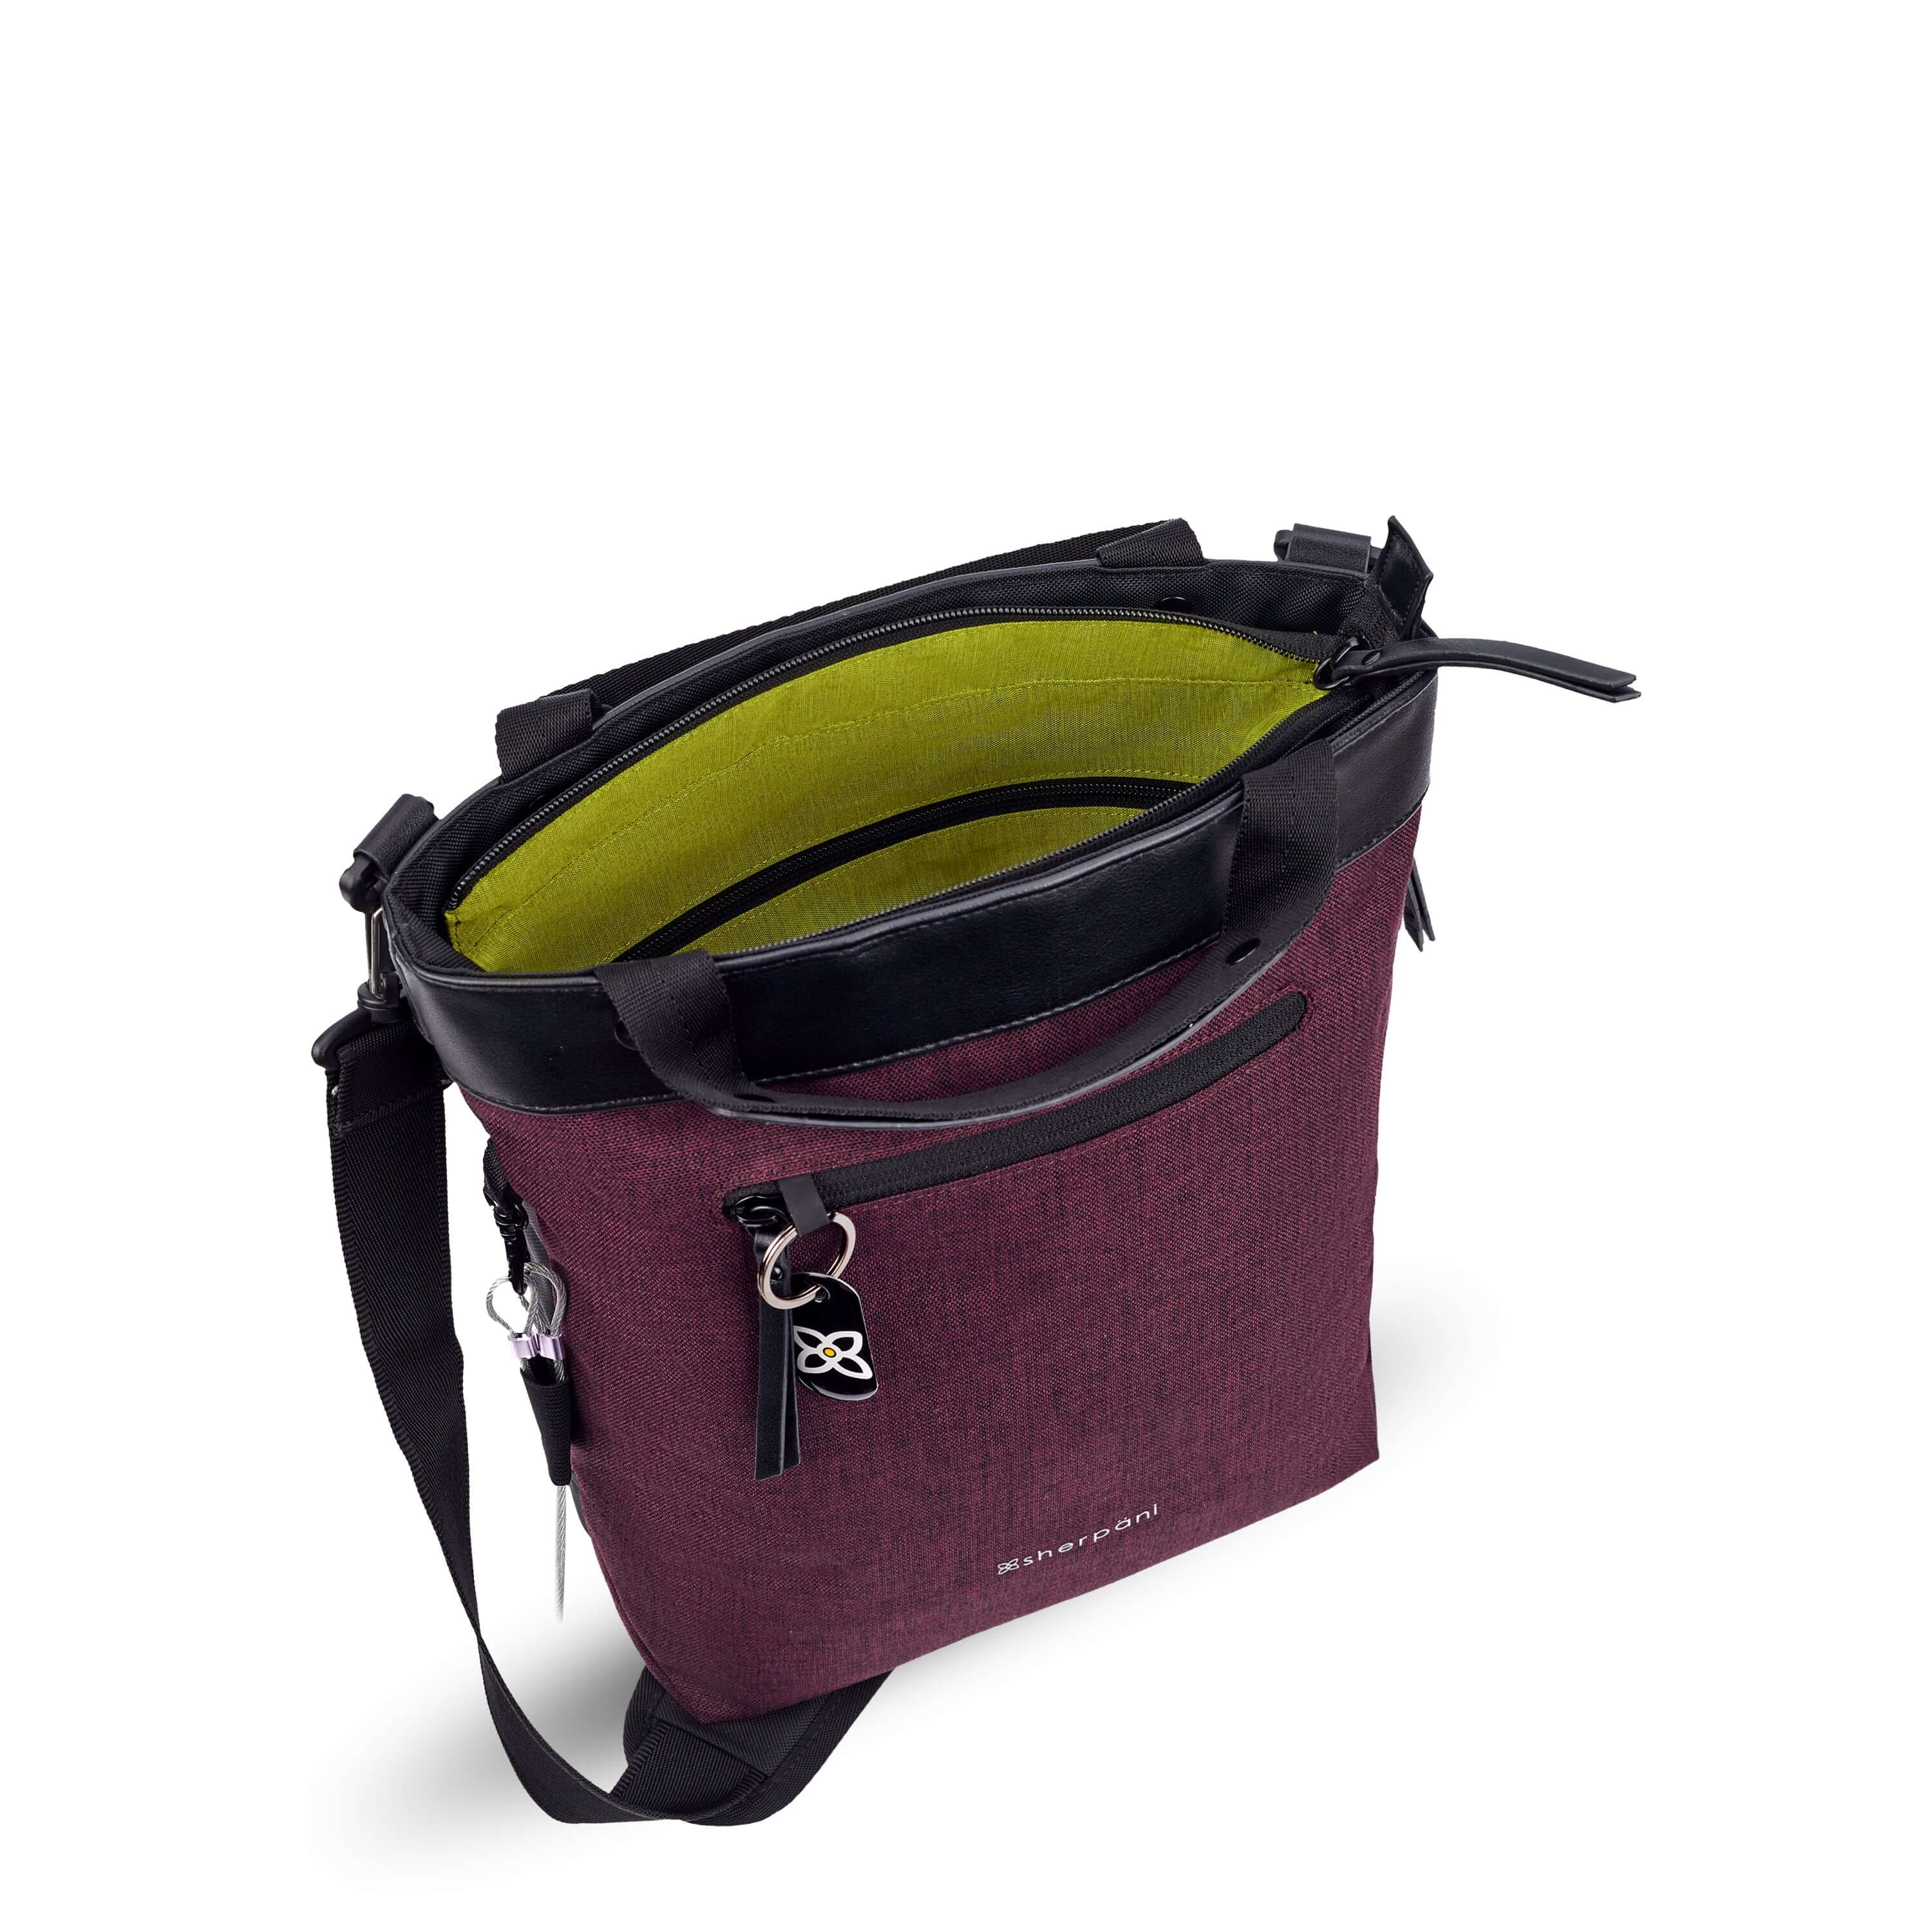 Top view of Sherpani’s Anti-Theft bag, the Geo AT in Merlot, with vegan leather accents in black.The main zipper compartment of the bag is open to reveal a lime green interior. 